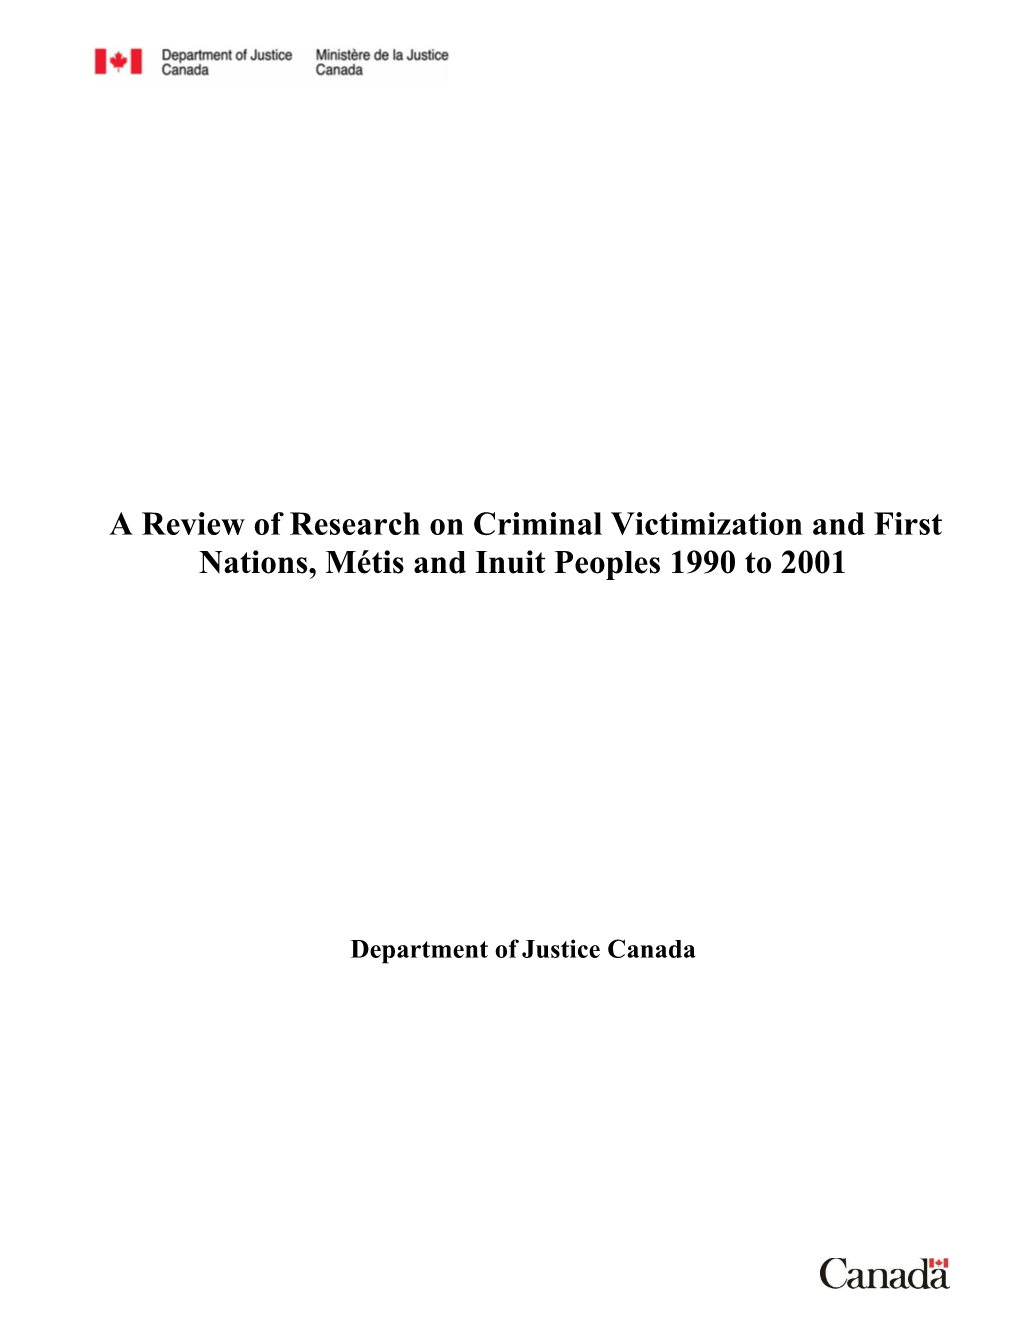 Review of Research on Criminal Victimization and First Nations, Métis and Inuit Peoples 1990 to 2001